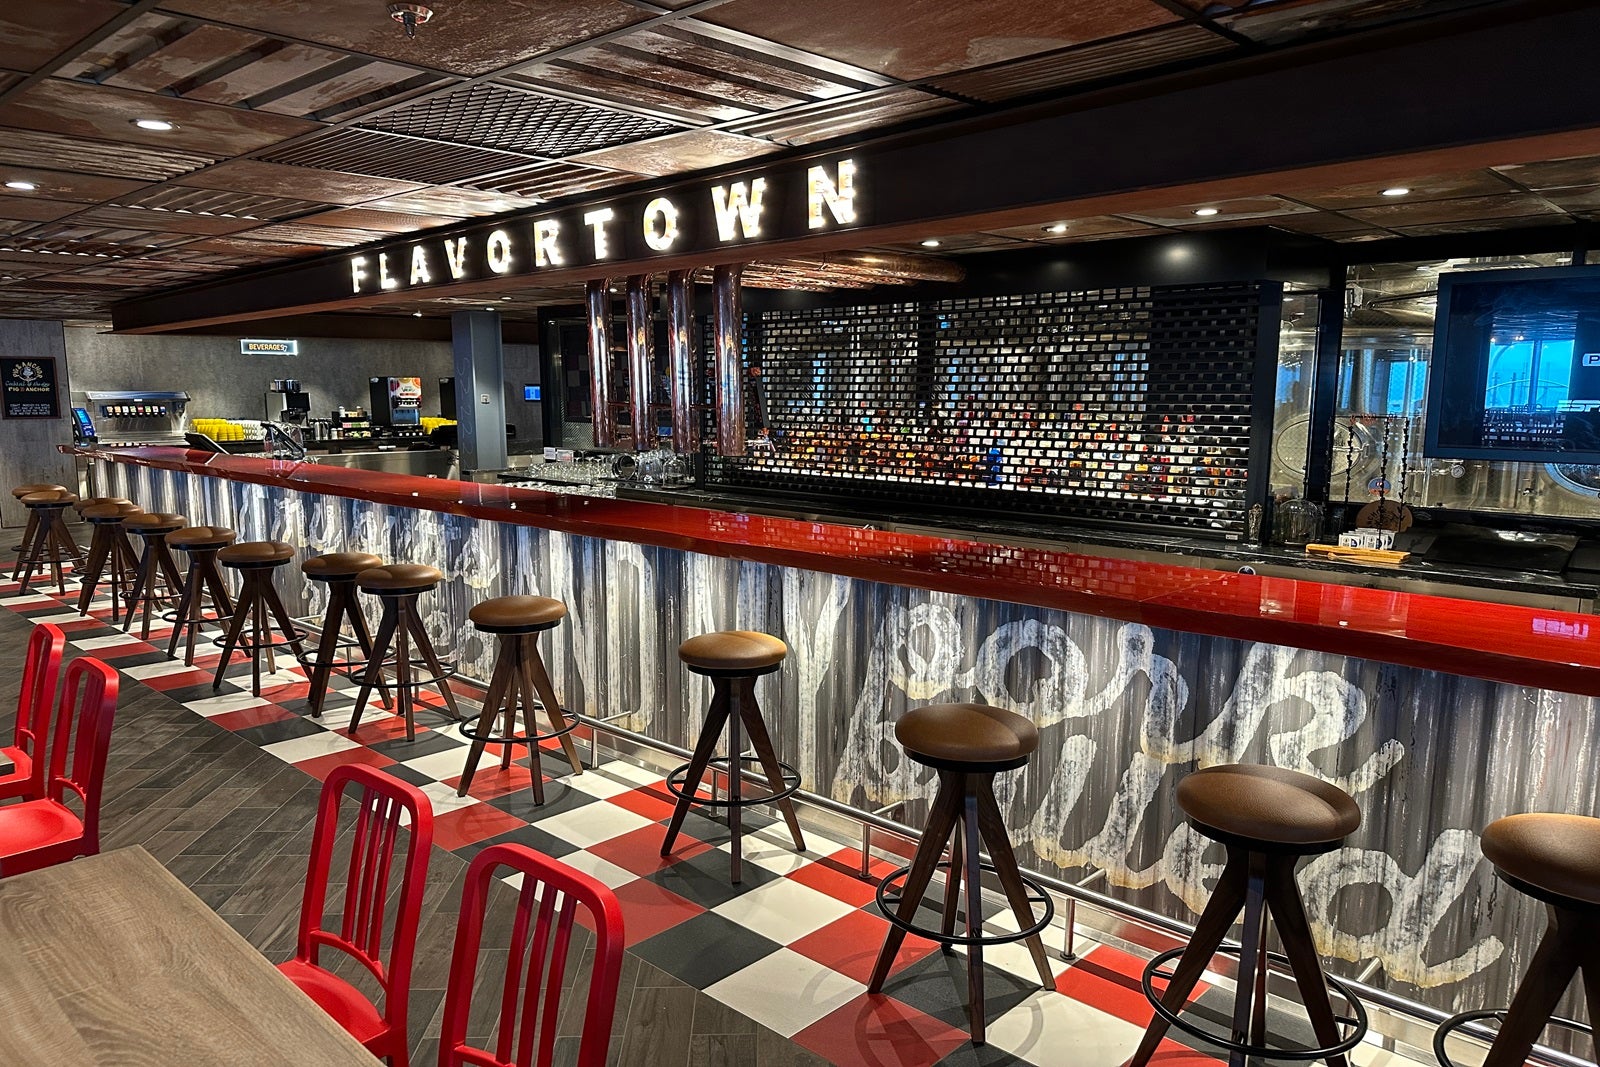 A metallic, industrial-looking bar with a red countertop, stools and a sign that reads "Flavortown"